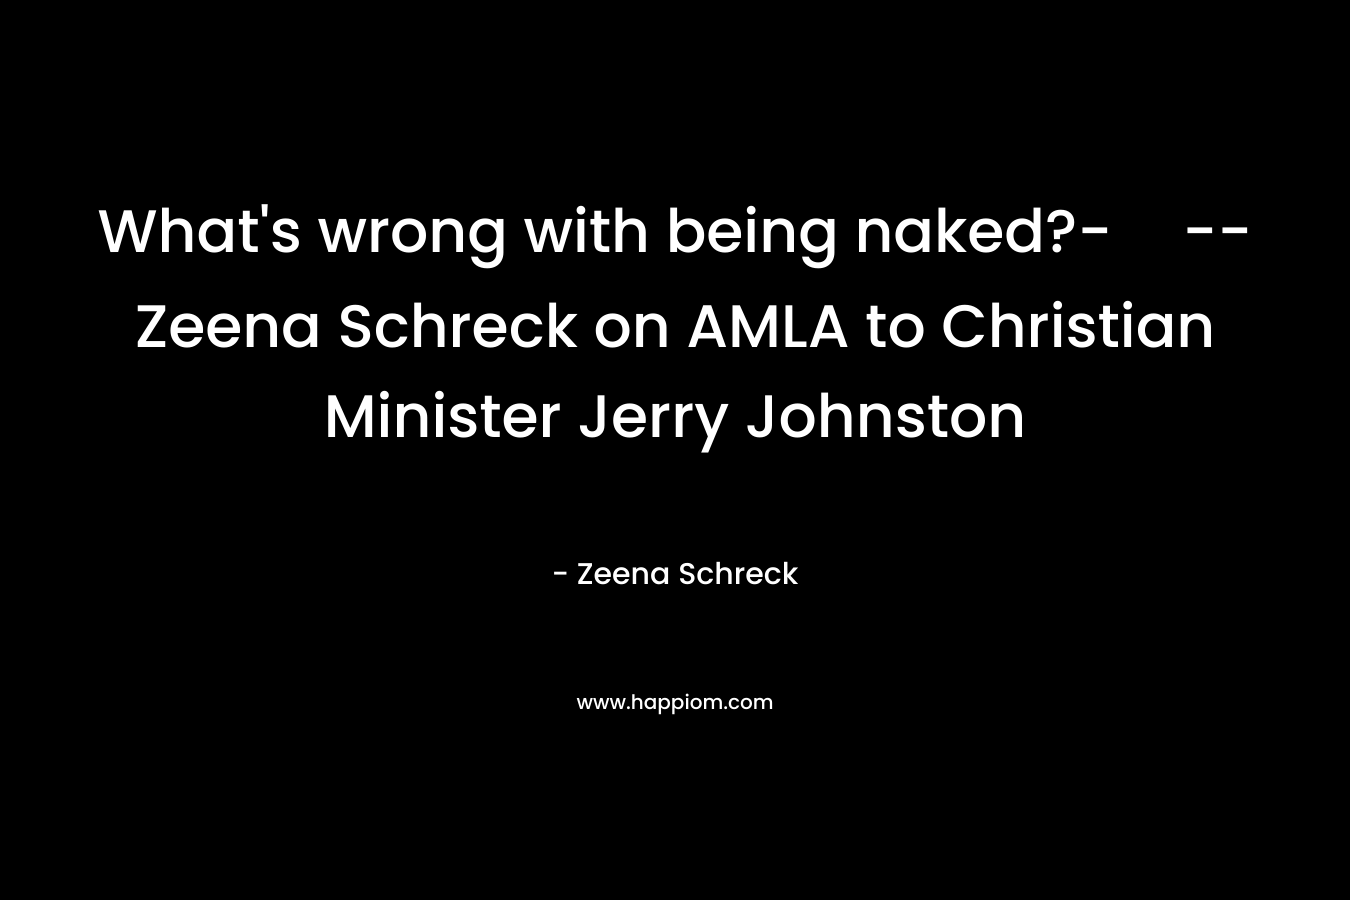 What's wrong with being naked?---Zeena Schreck on AMLA to Christian Minister Jerry Johnston